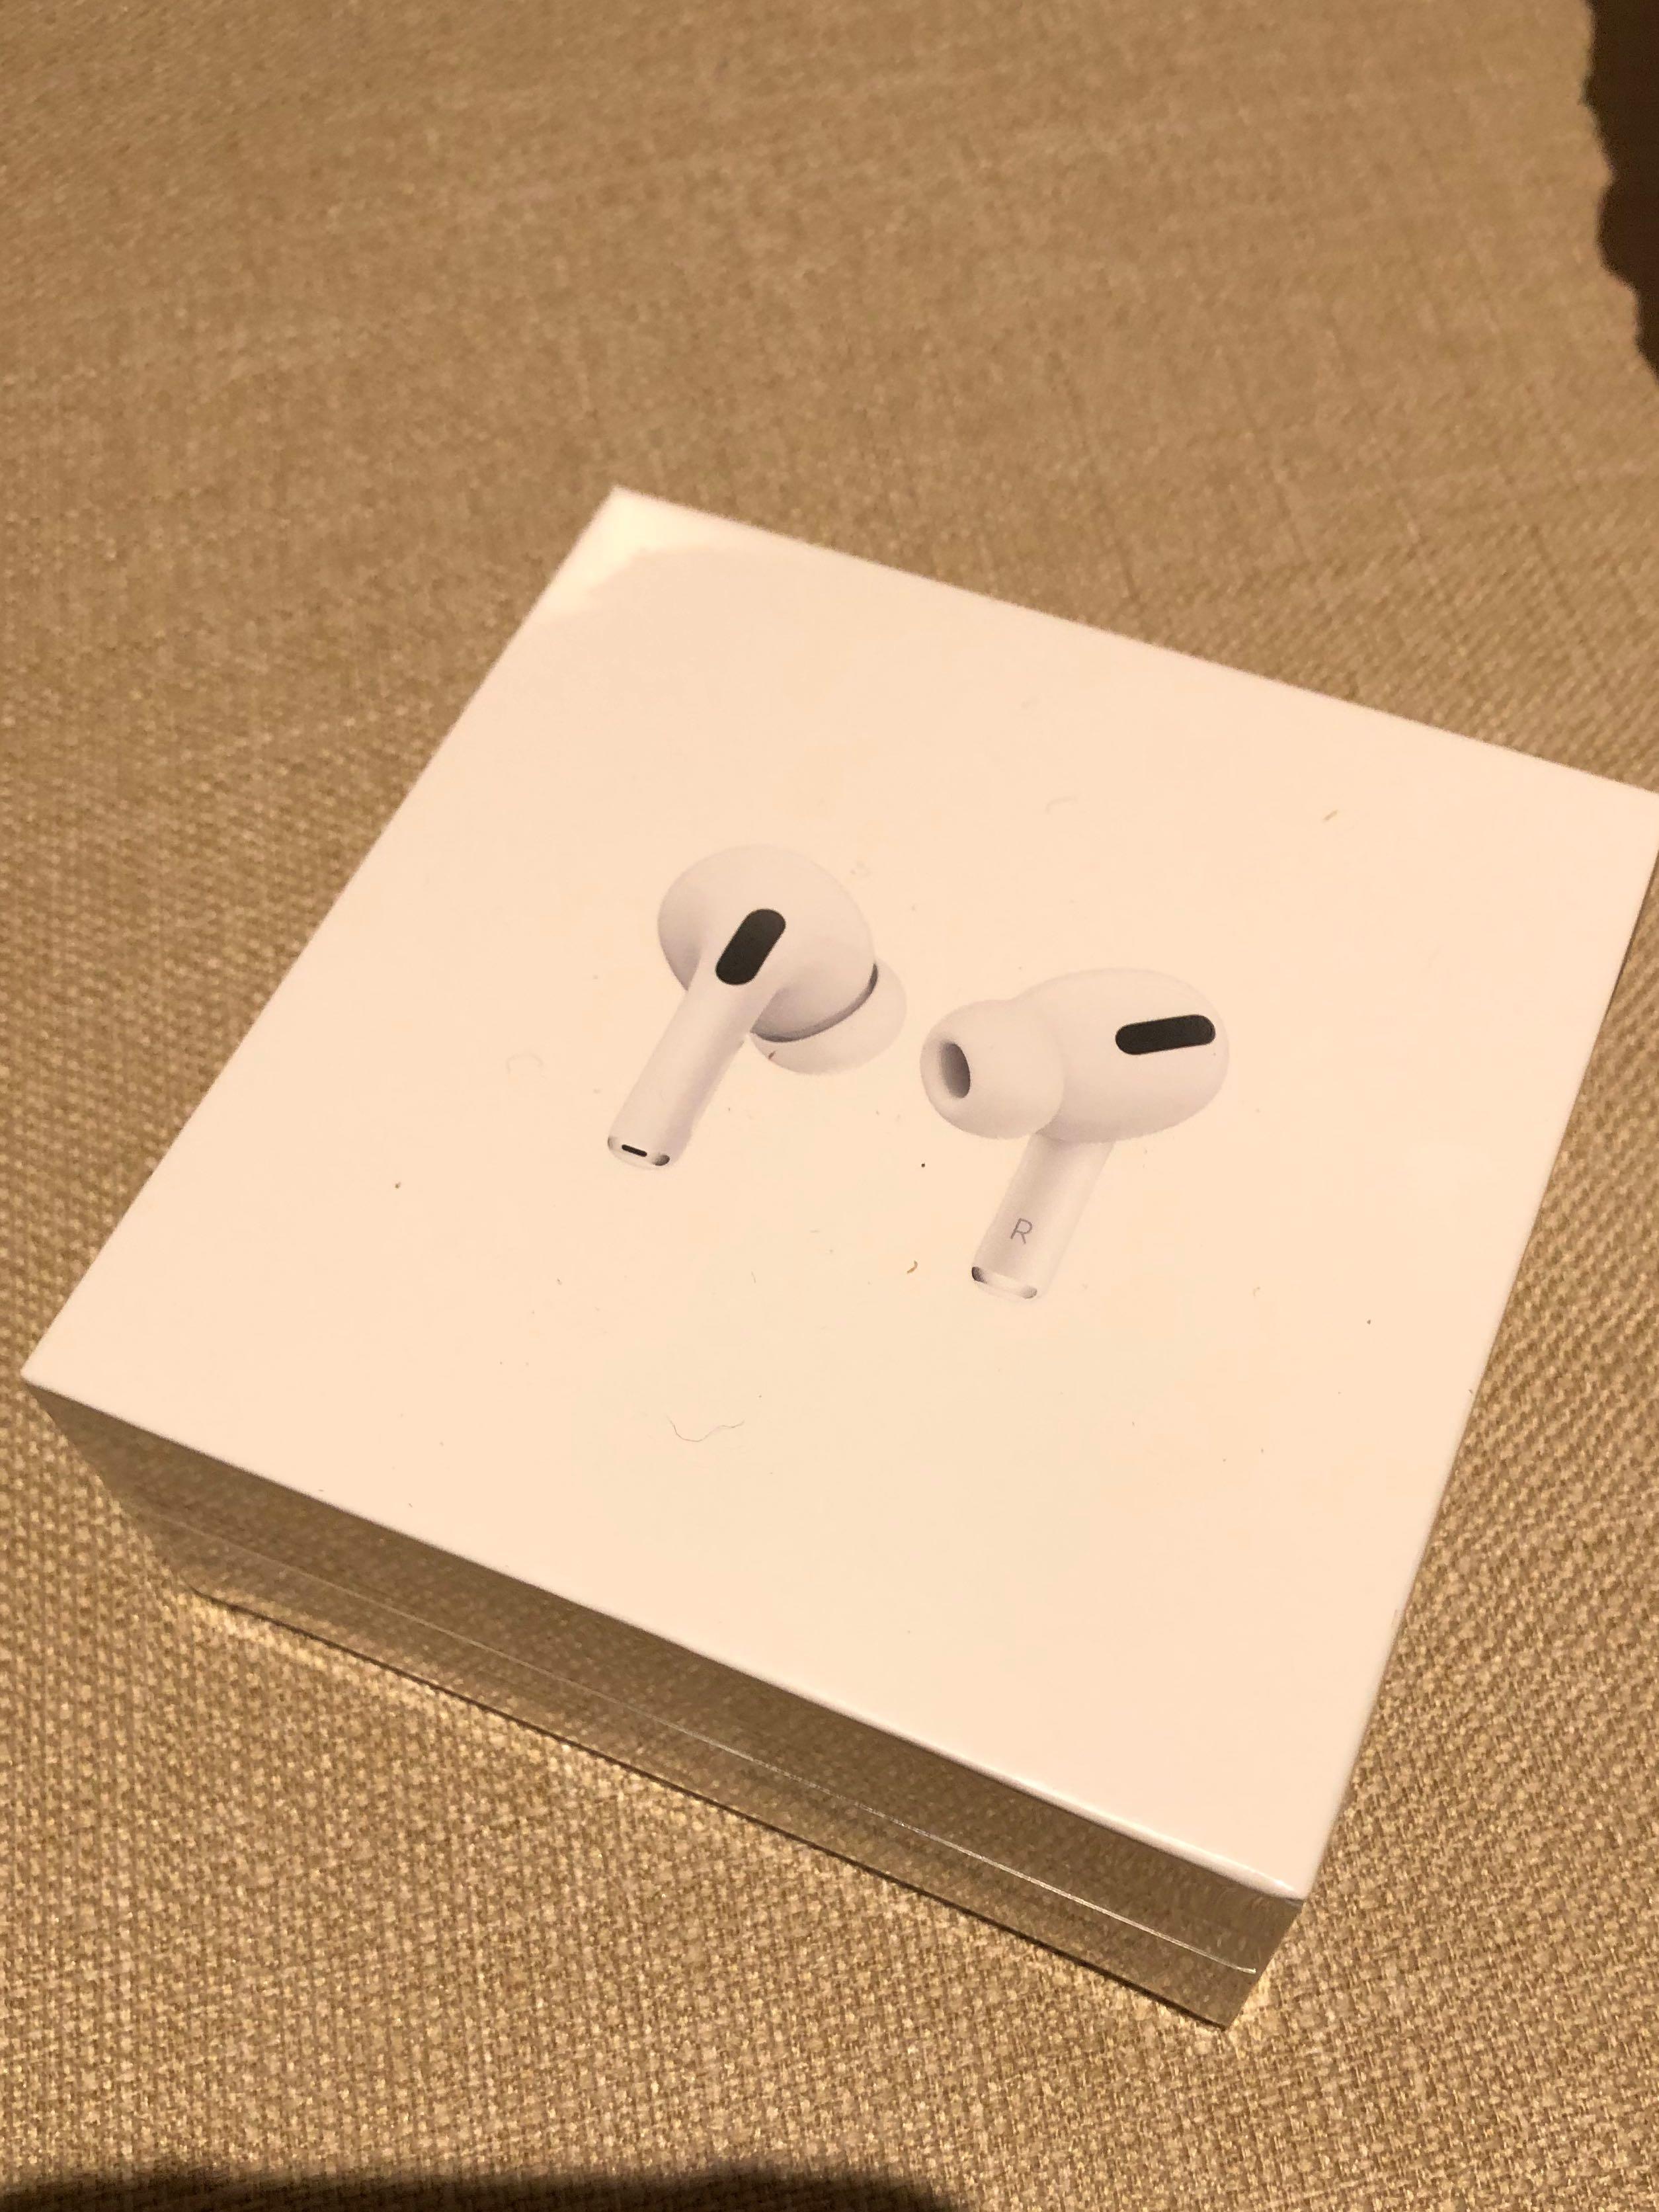 Apple AirPods pro全新未拆封